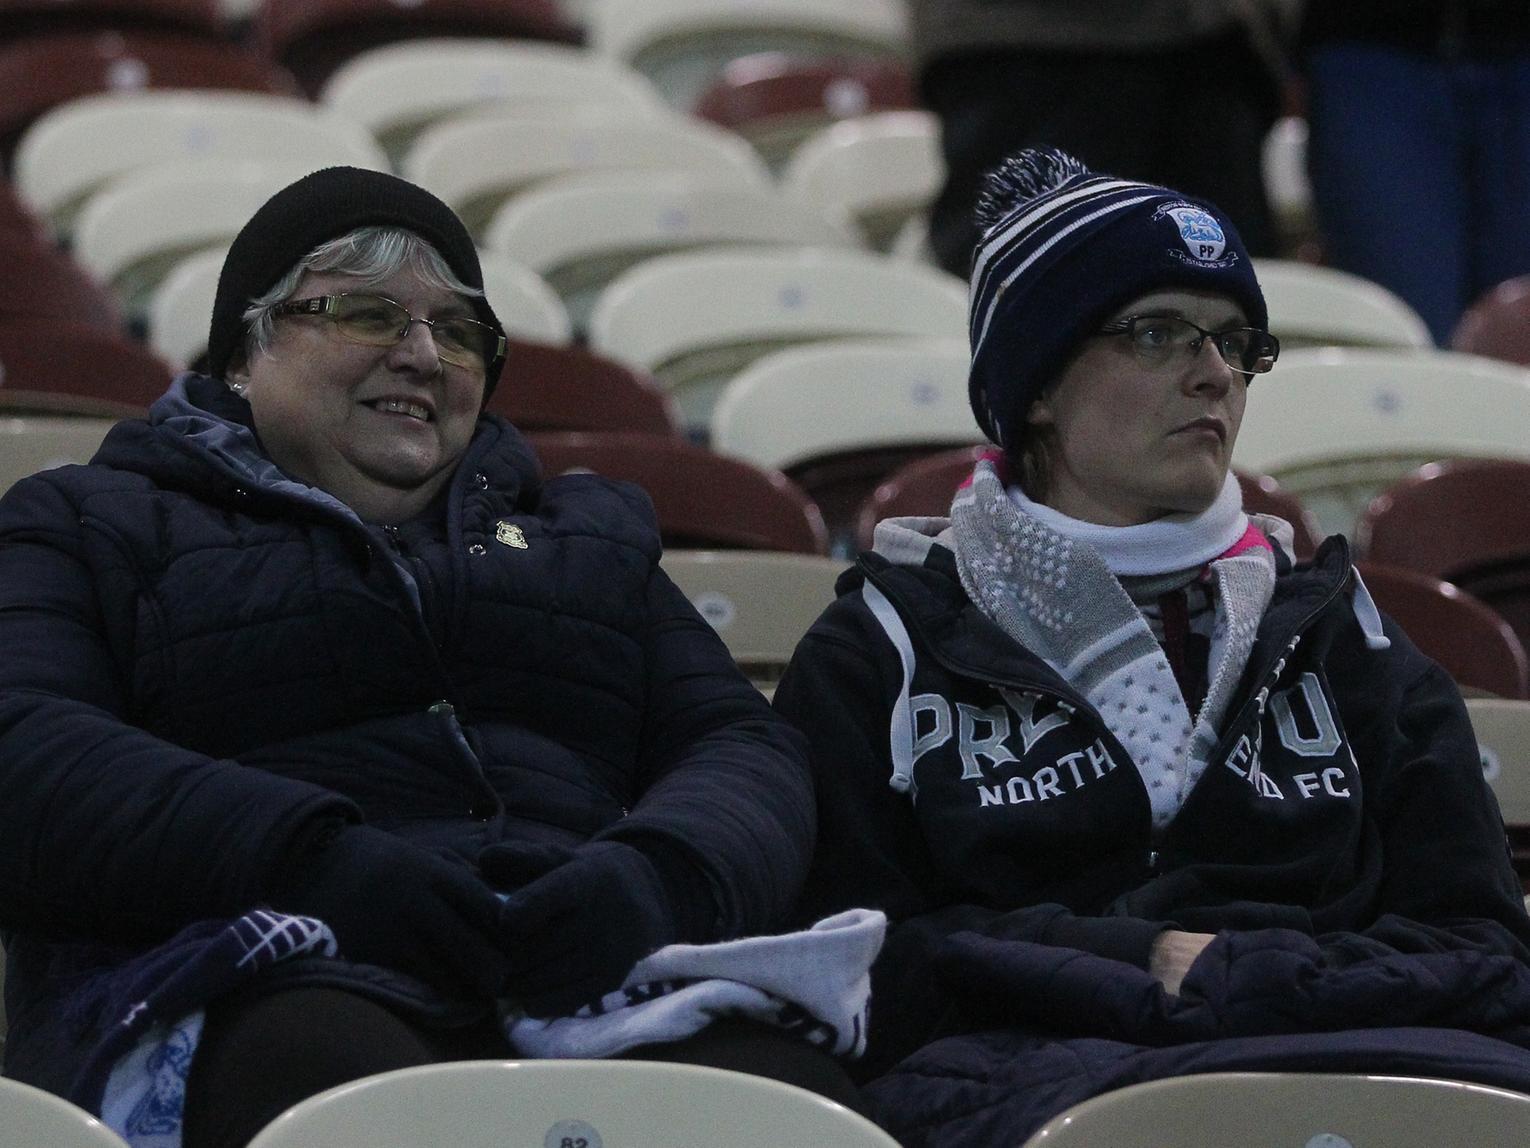 Plenty of PNE merchandise on show from these two fans ahead of kick off.